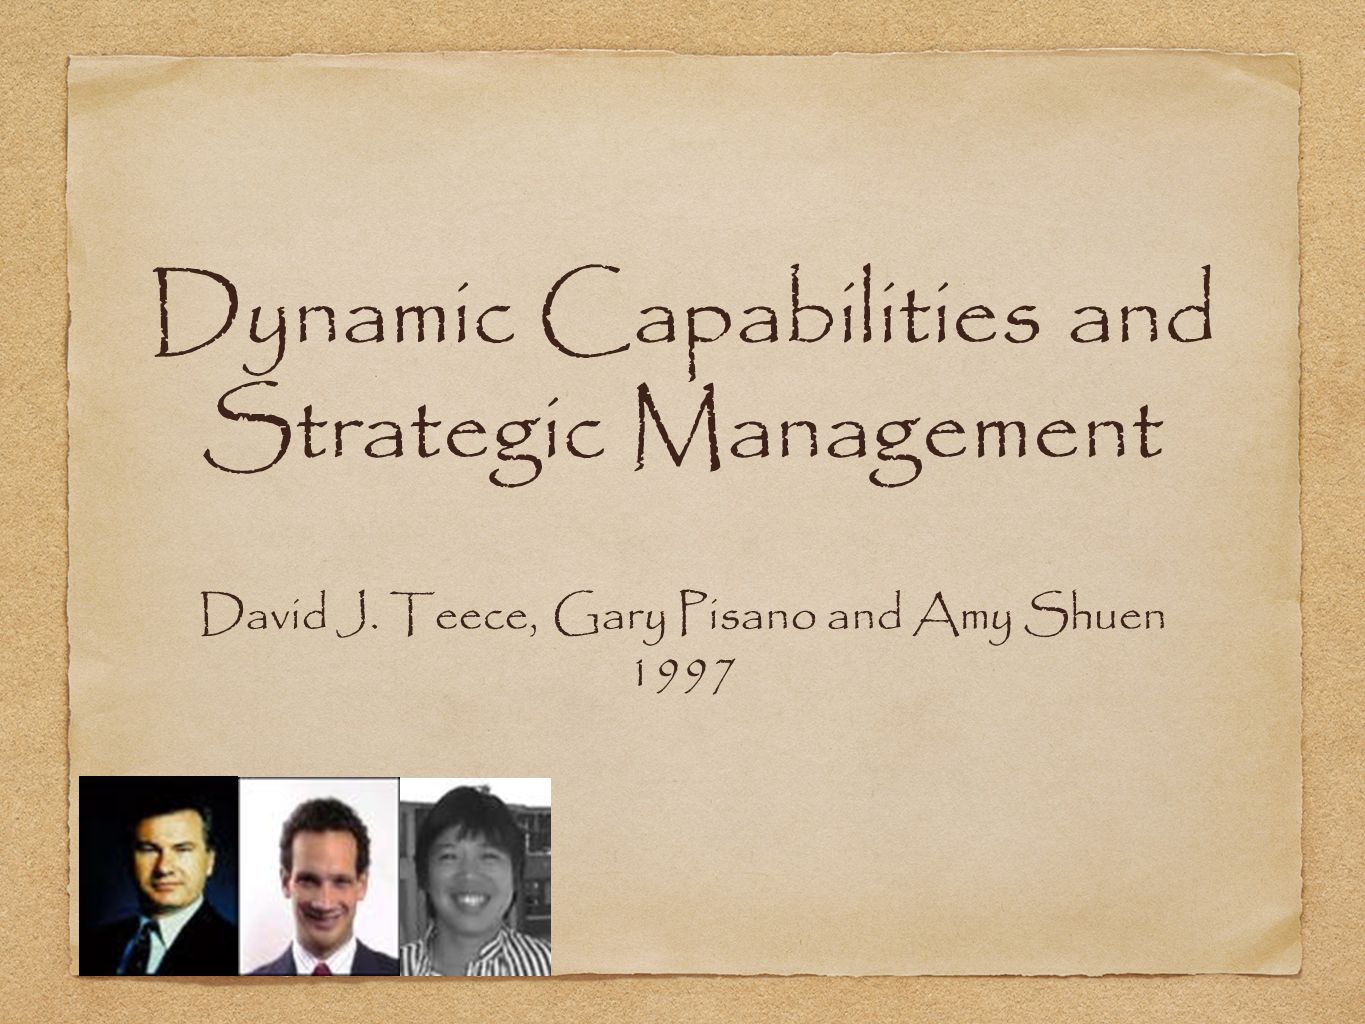 Dynamic Capabilities and Strategic Management - ppt video online download